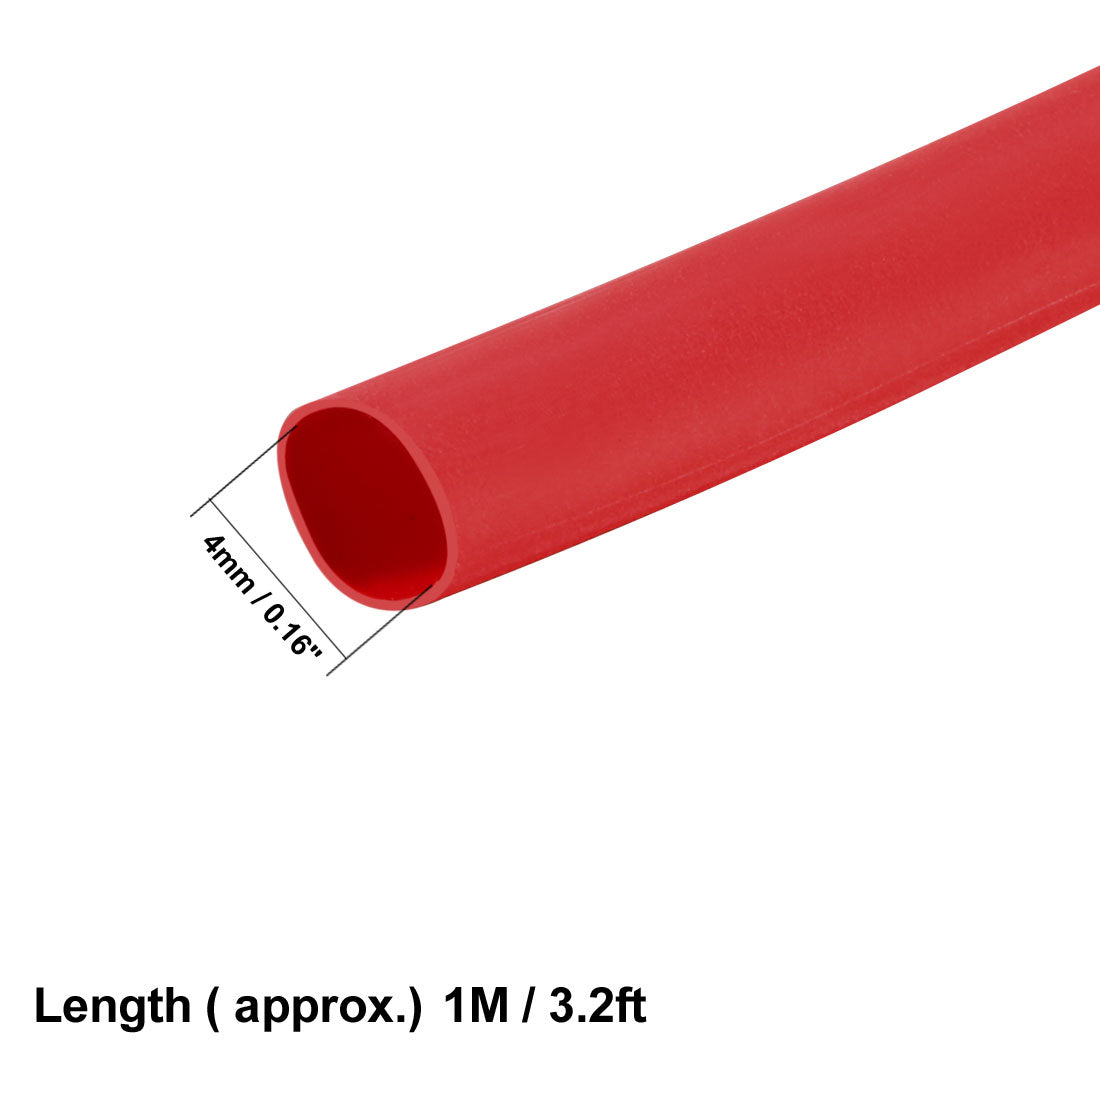 uxcell Uxcell Heat Shrink Tube 2:1 Electrical Insulation Tube Wire Cable Tubing Sleeving Wrap Red 4mm Diameter 1m Long